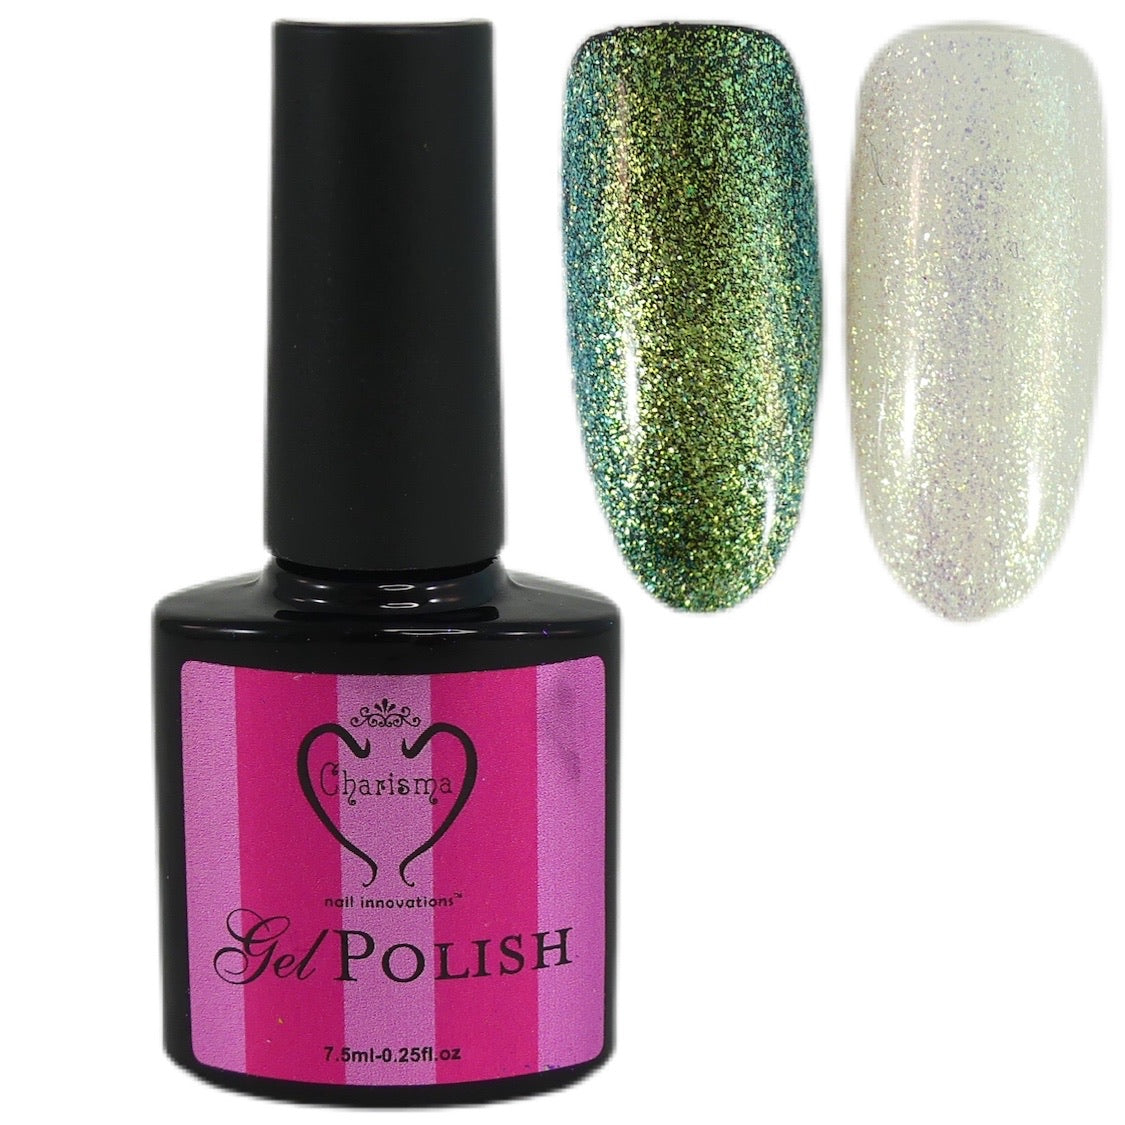 Load image into Gallery viewer, Charisma Gel Polish #3 - My Little Nail Art Shop
